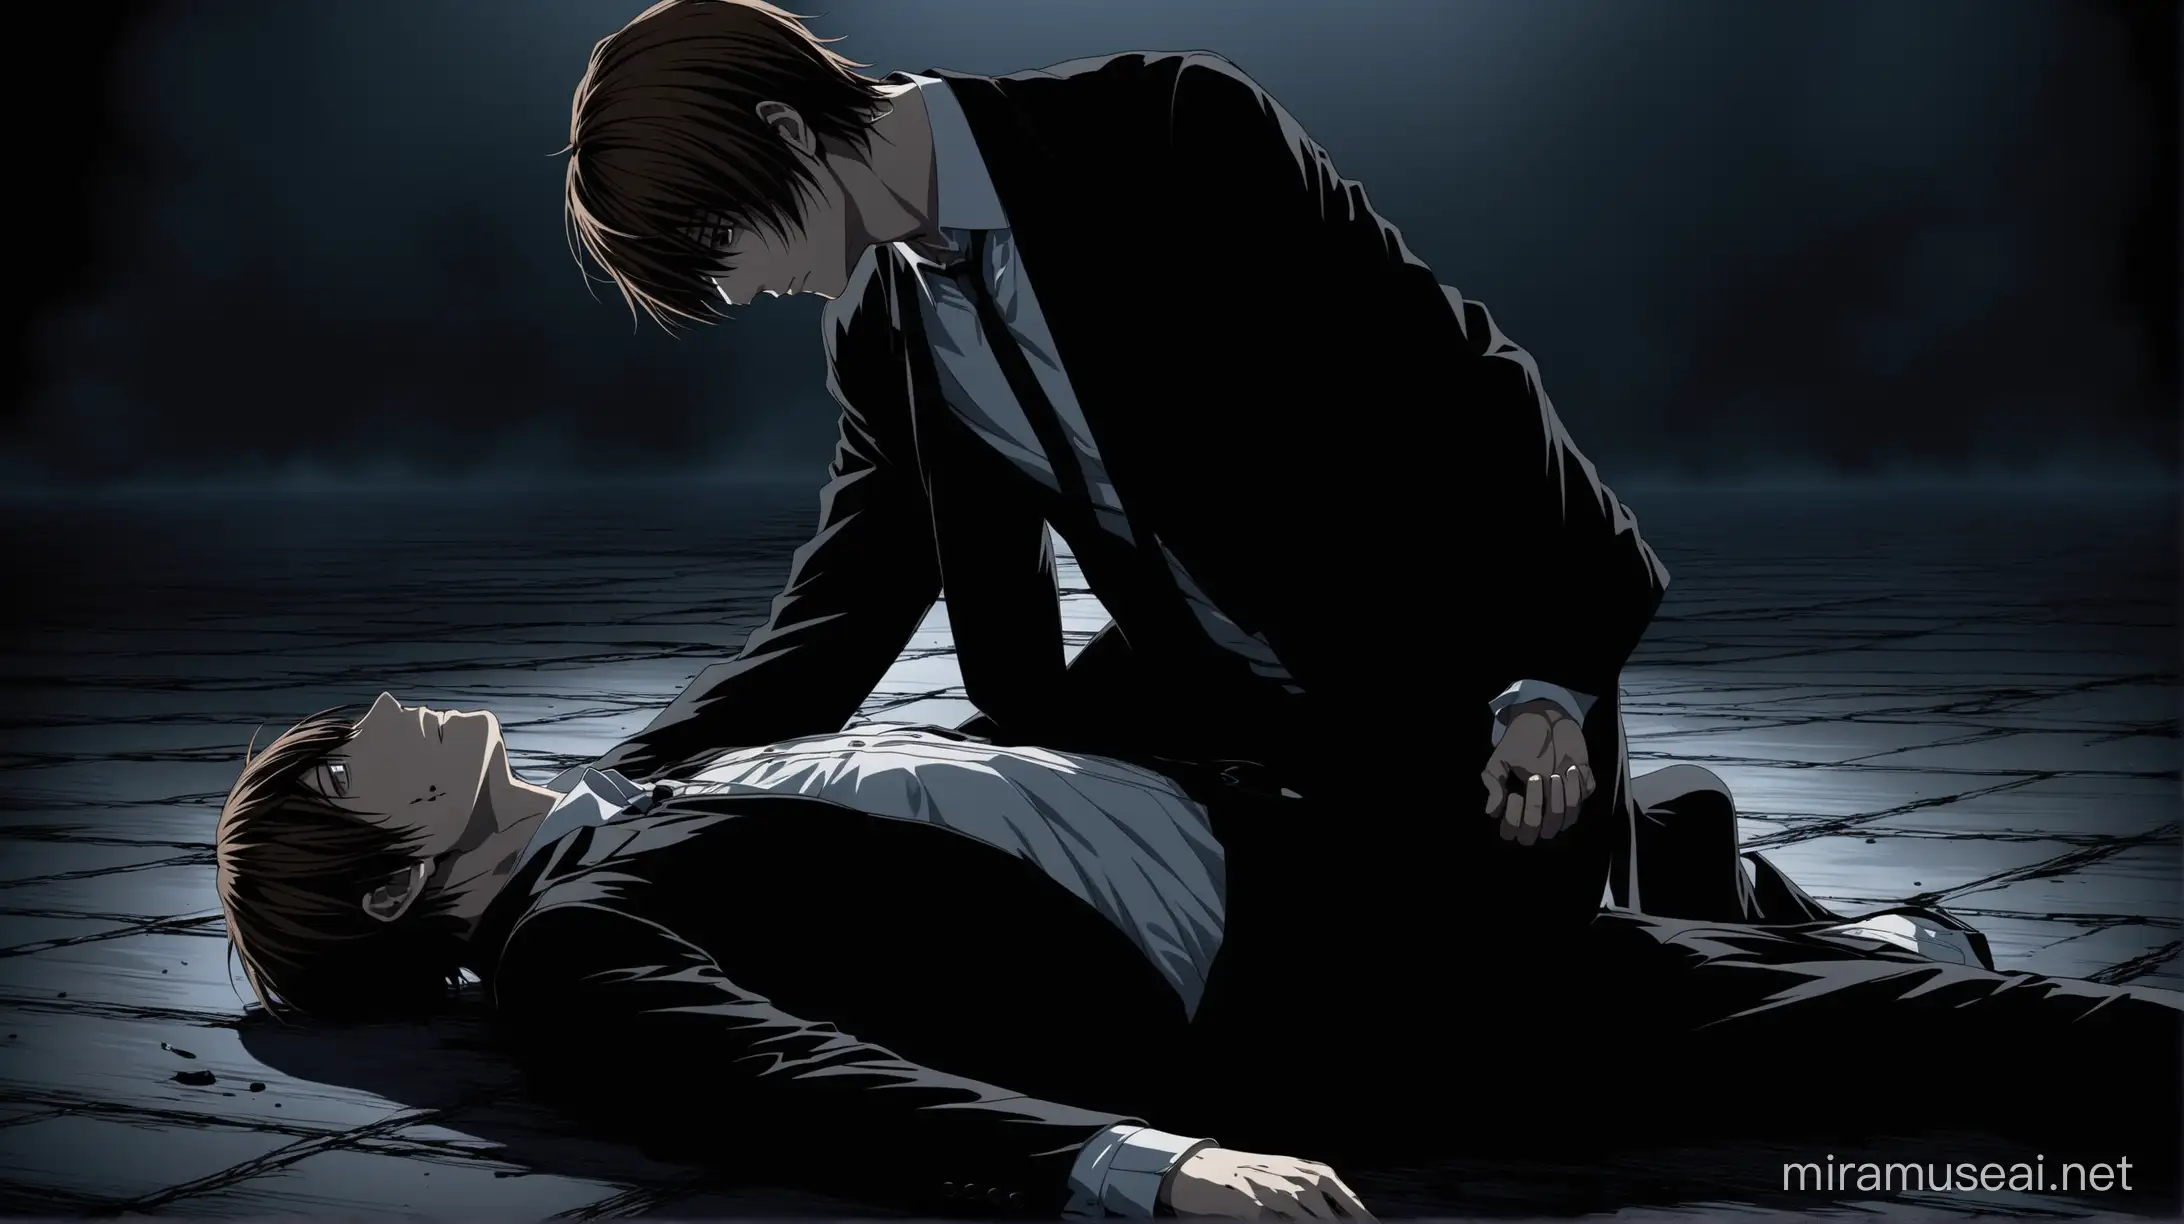 The scene depicts a dramatic moment from Death Note, showing Light Yagami standing over his father, who is lying on the ground, wounded. Light's expression is conflicted, showing a mix of determination and sorrow. His father, weakened and reaching out to him, conveys a sense of betrayal and heartbreak. The setting is dark and somber, with shadows adding to the tense atmosphere. This scene captures the emotional turmoil and moral dilemma faced by Light as he makes the ultimate sacrifice in his pursuit of justice.